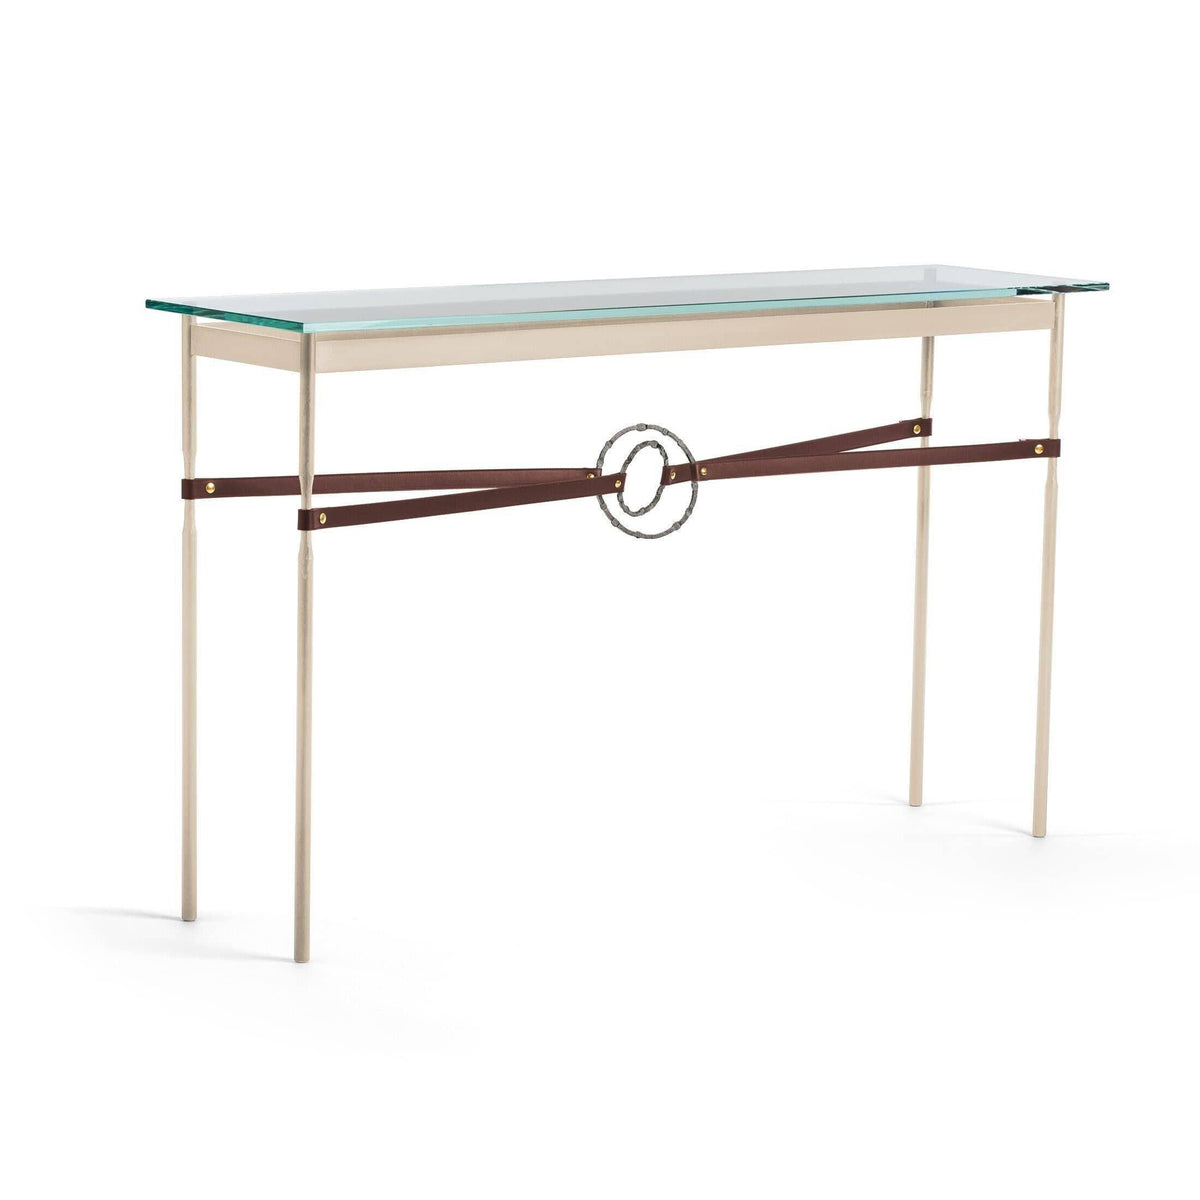 Hubbardton Forge - Equus Brown Leather Console Table - 750118-84-20-LB-VA0714 | Montreal Lighting & Hardware